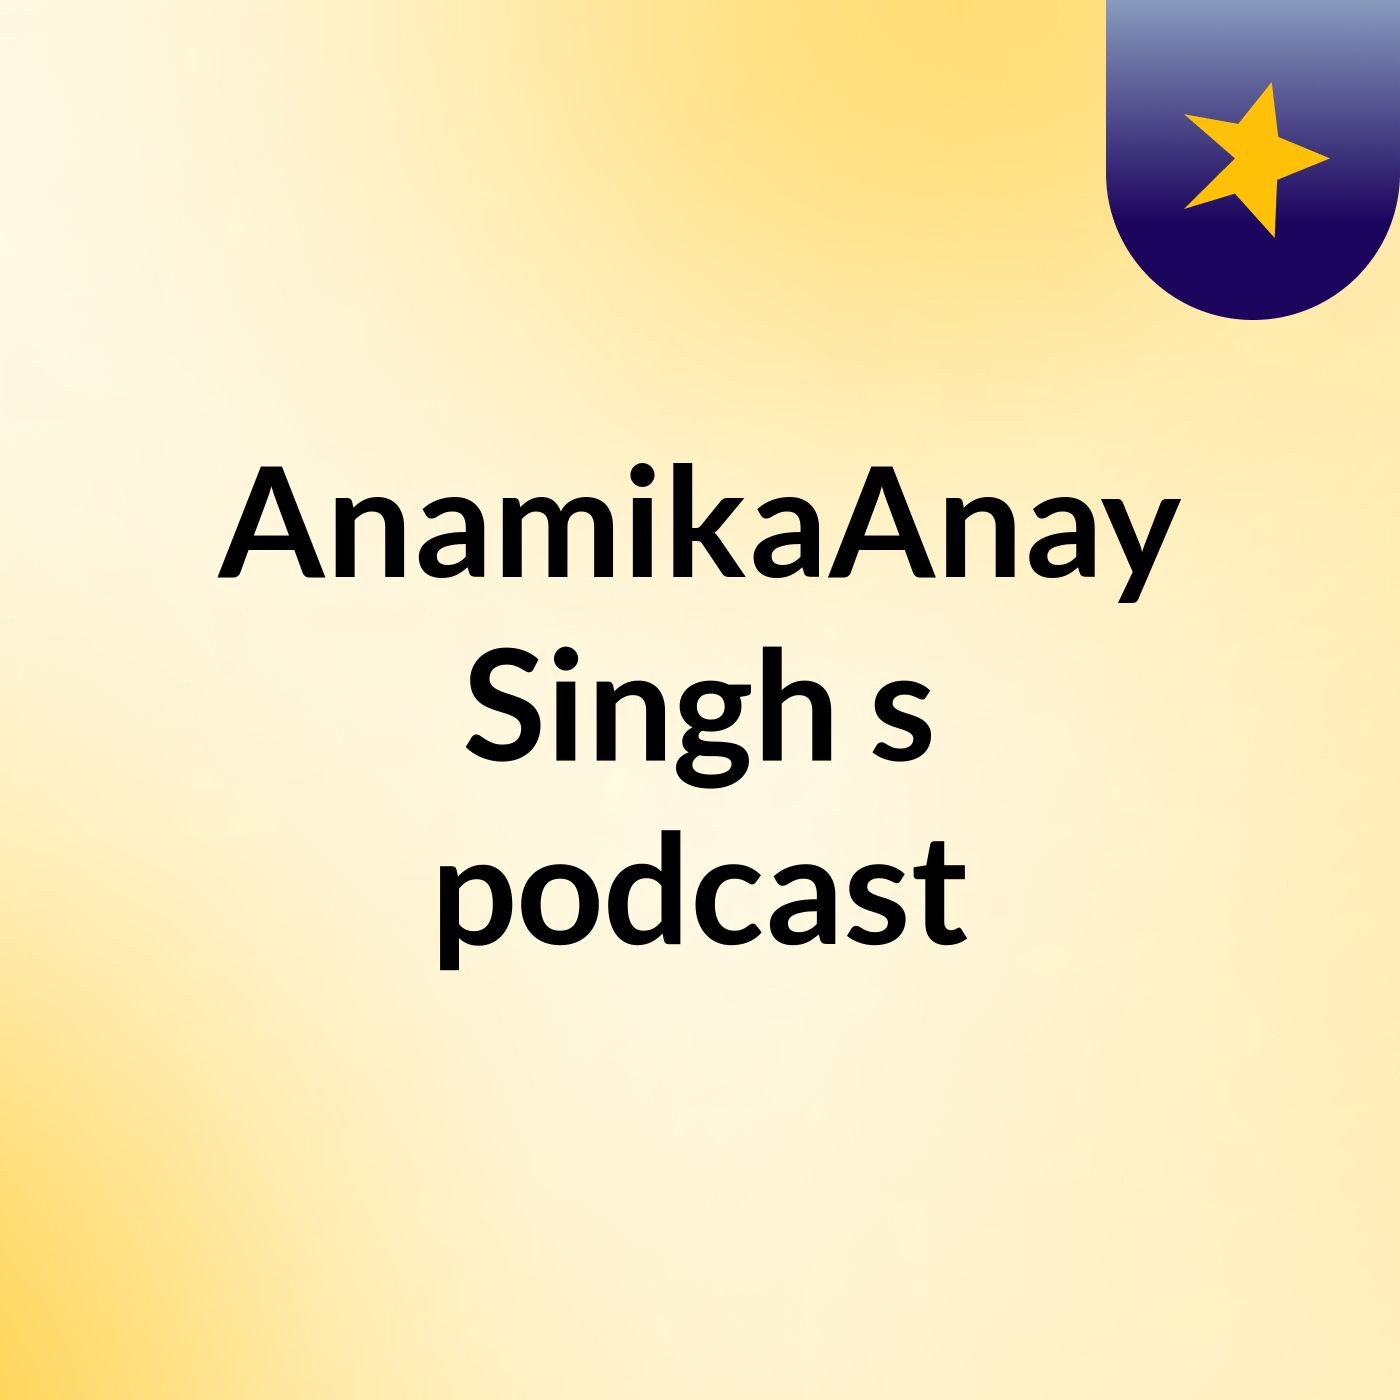 Episode 2 - AnamikaAnay Singh's podcast